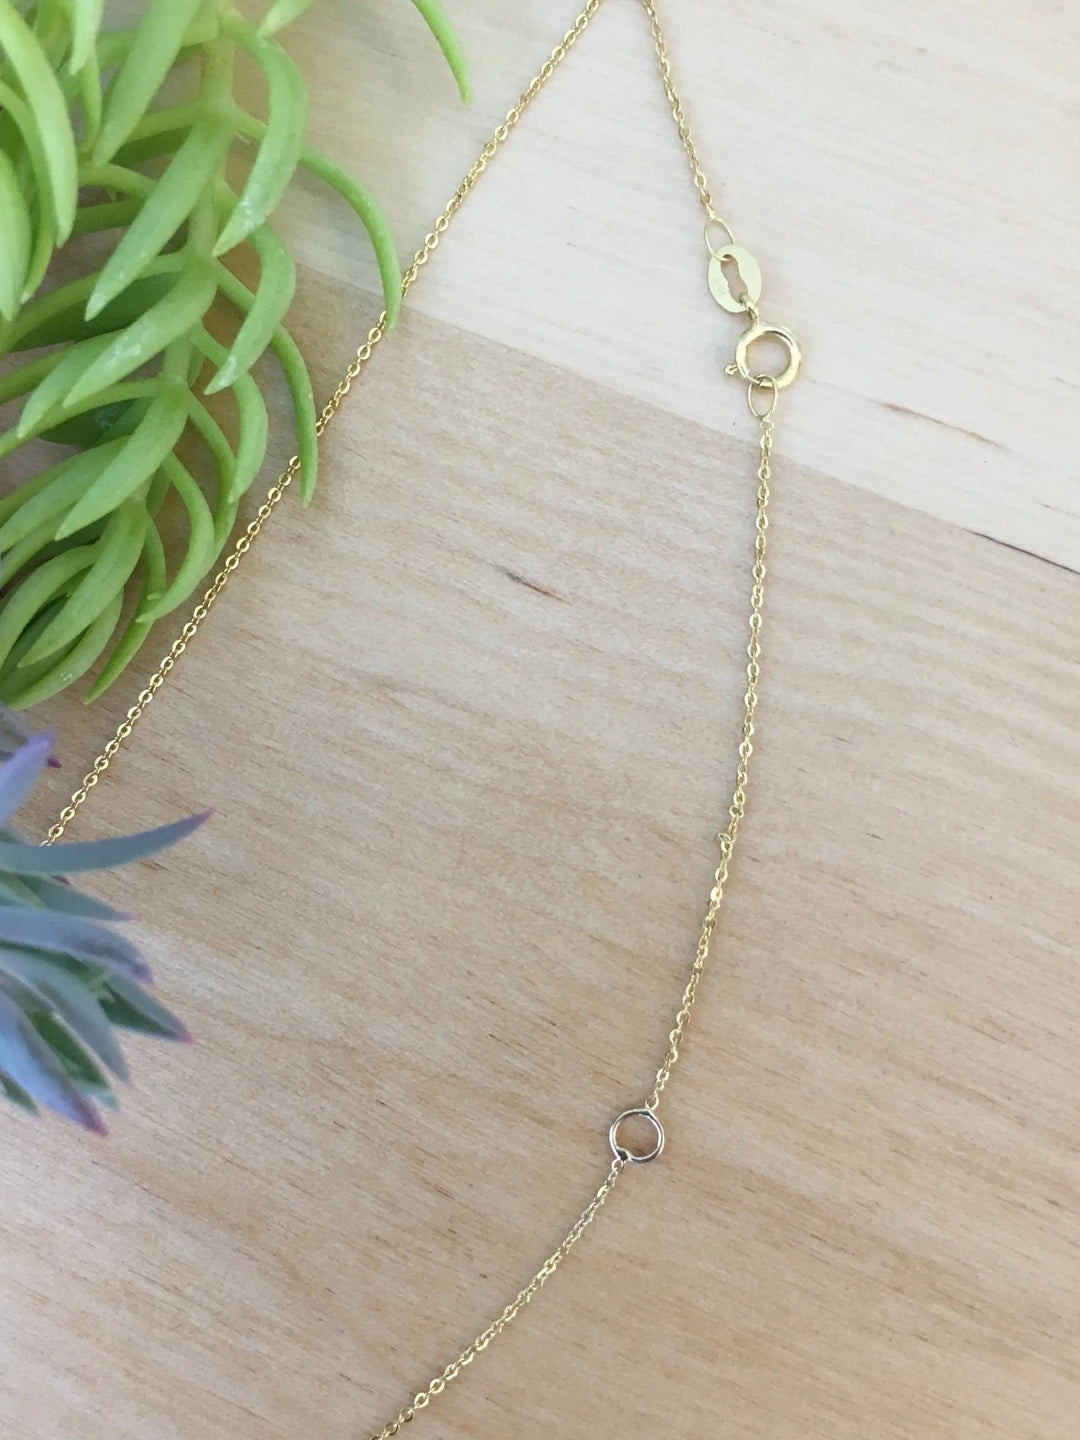 Tiny 14k Gold Heart Pendant necklace with adjustable chain accommodates 16 and 18 inch length | The Gentle Pit